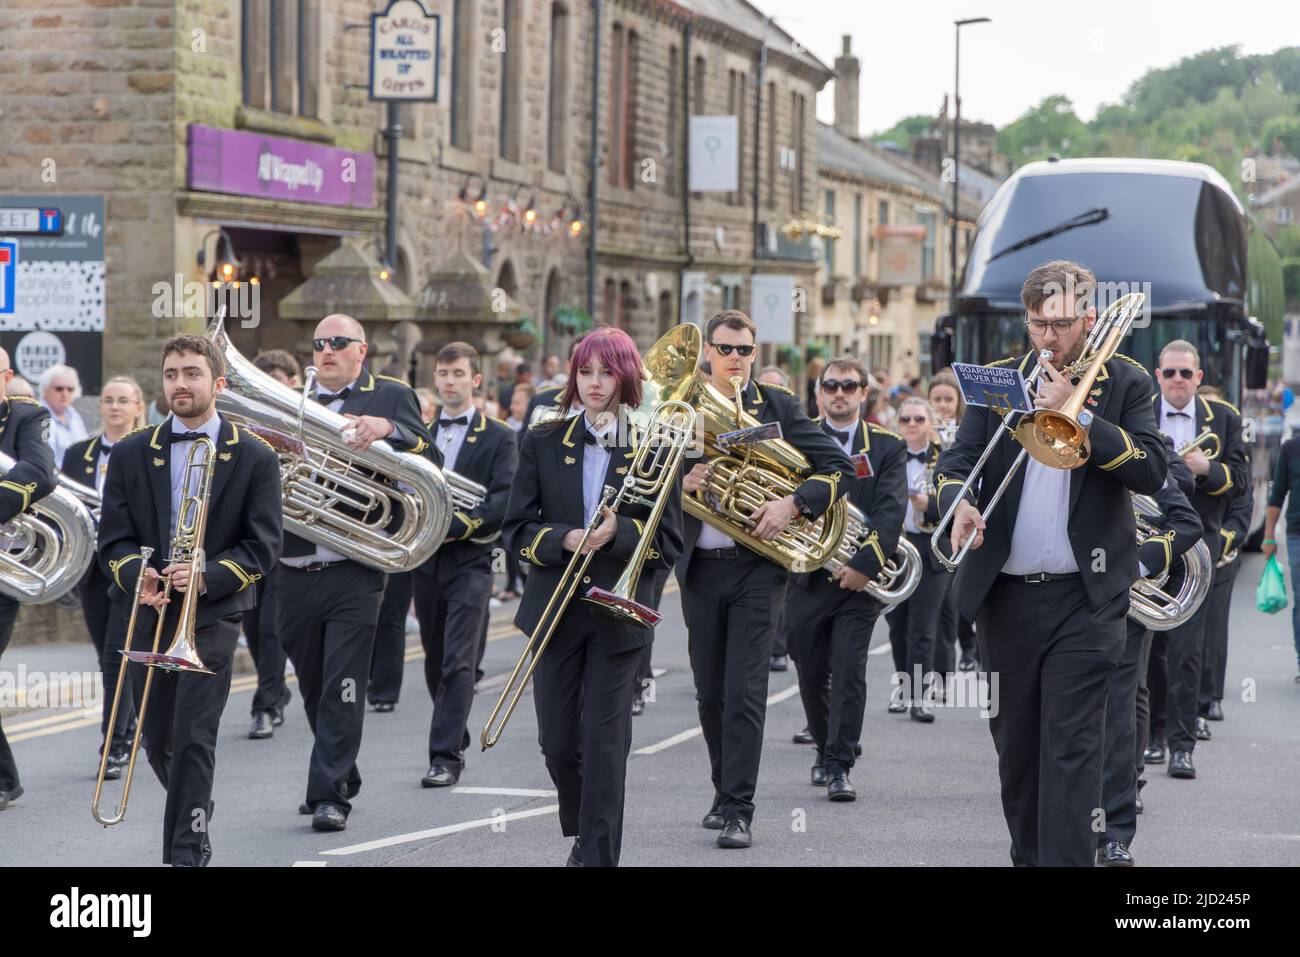 Brass bands marching on the street at the Uppermill Whit Friday Contest in Saddleworth, England. Stock Photo